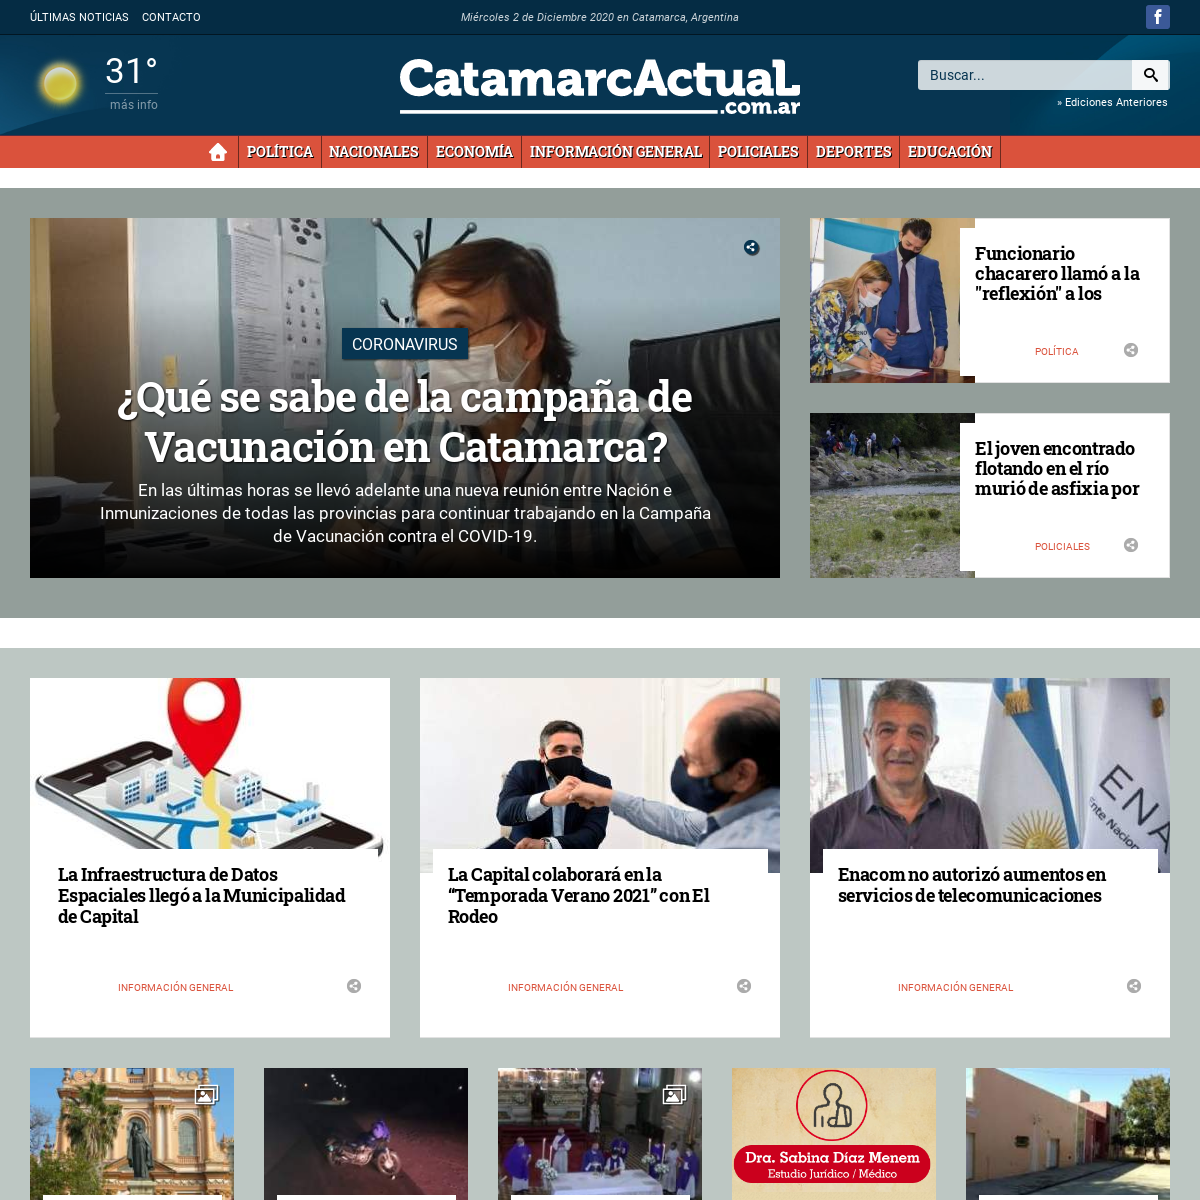 A complete backup of catamarcactual.com.ar